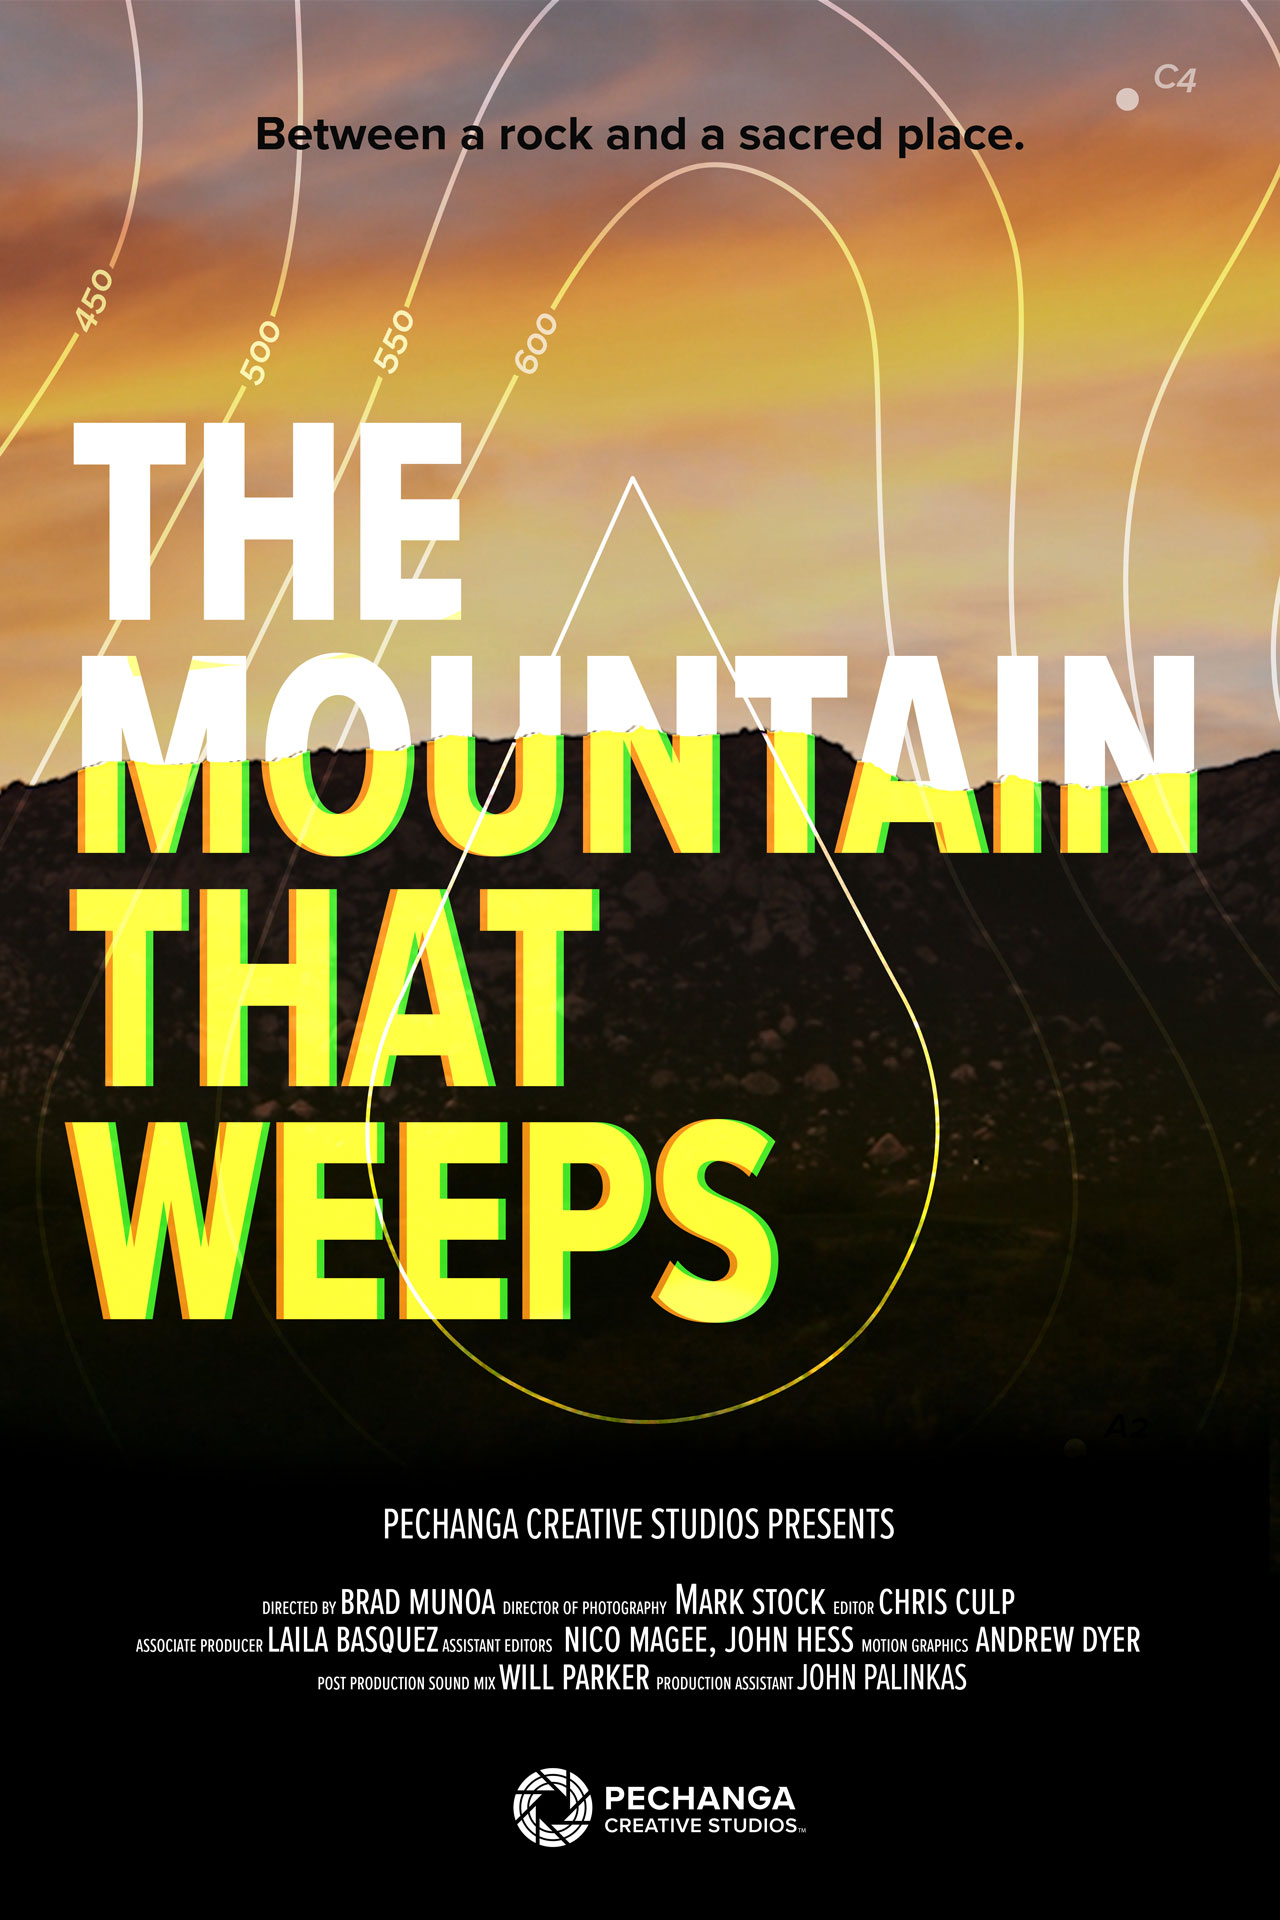 The Mountain That Weeps